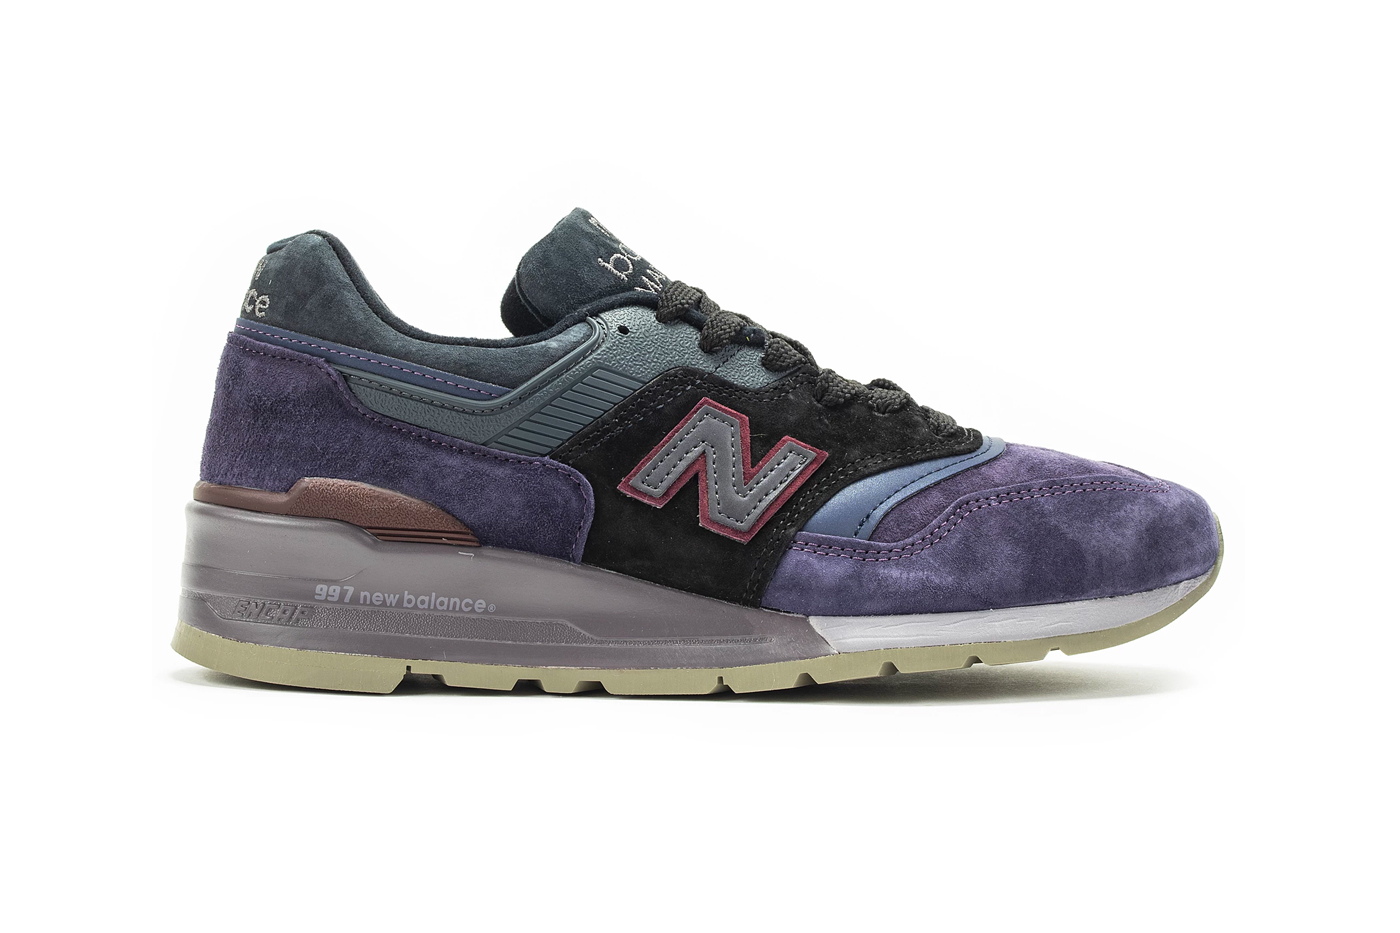 New Balance M997NAK Royal Purple Black sneakers shoes footwear silhouettes XLD trainers runners lifestyle kicks streetwear made in usa encap midsole EVA Fearlessly Independent Since 1906